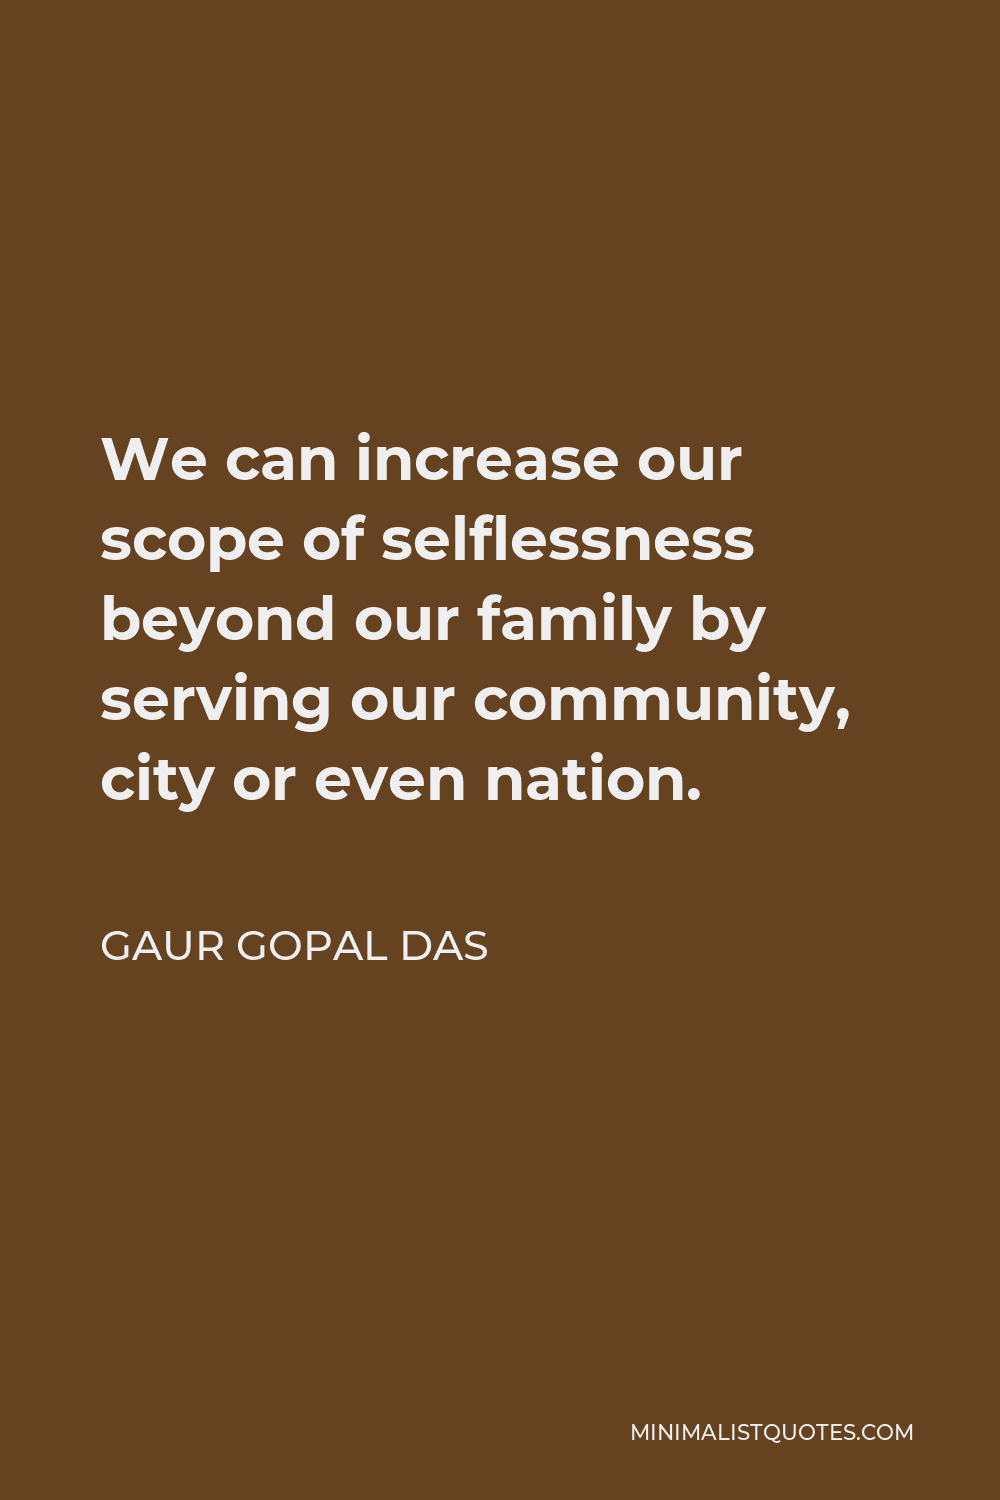 Gaur Gopal Das Quote - We can increase our scope of selflessness beyond our family by serving our community, city or even nation.